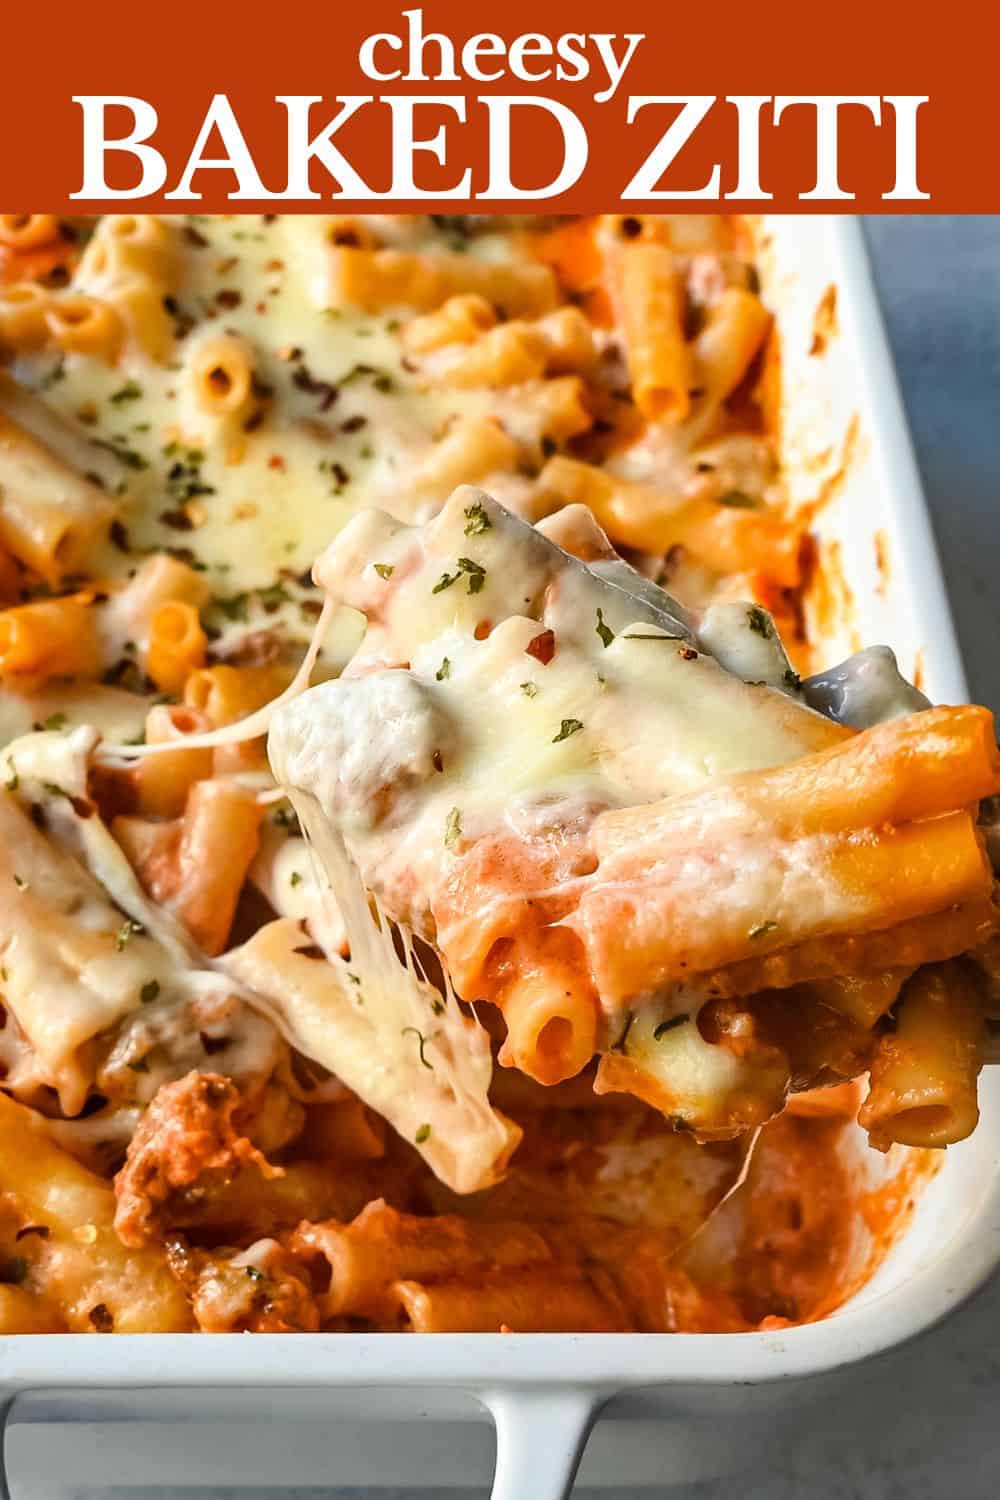 This Baked Ziti Pasta is made with ziti noodles, sausage, marinara sauce, fresh basil, spices, whole milk mozzarella cheese, parmesan cheese, and heavy cream and baked until the cheese is melted. The best-baked ziti recipe! This is a perfect recipe to freeze or make ahead of time.